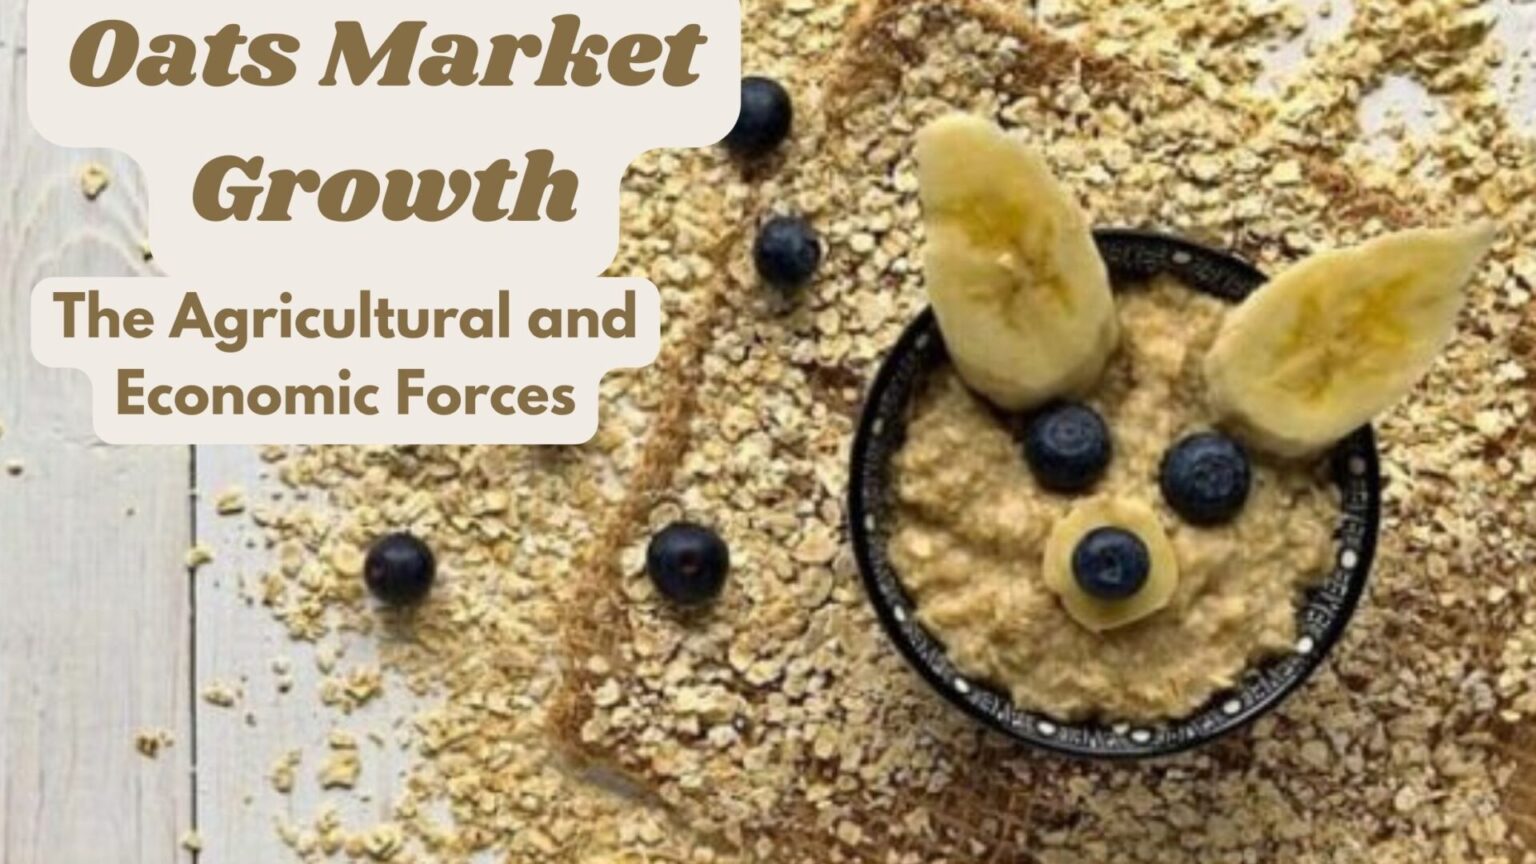 Oats Market GrowthThe Agricultural and Economic Forces